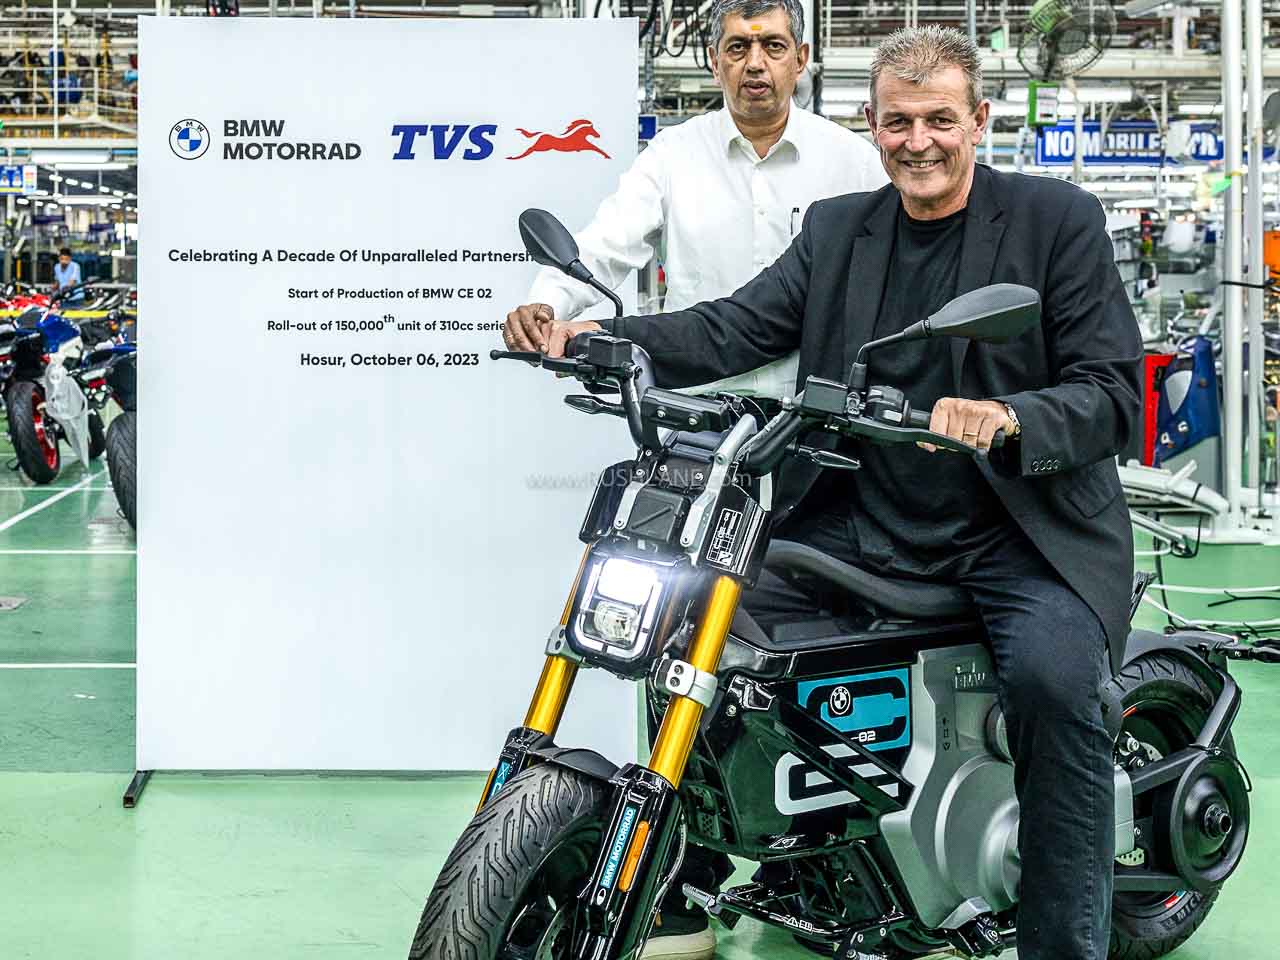 BMW CE-02 electric scooter production starts in India - Only for exports